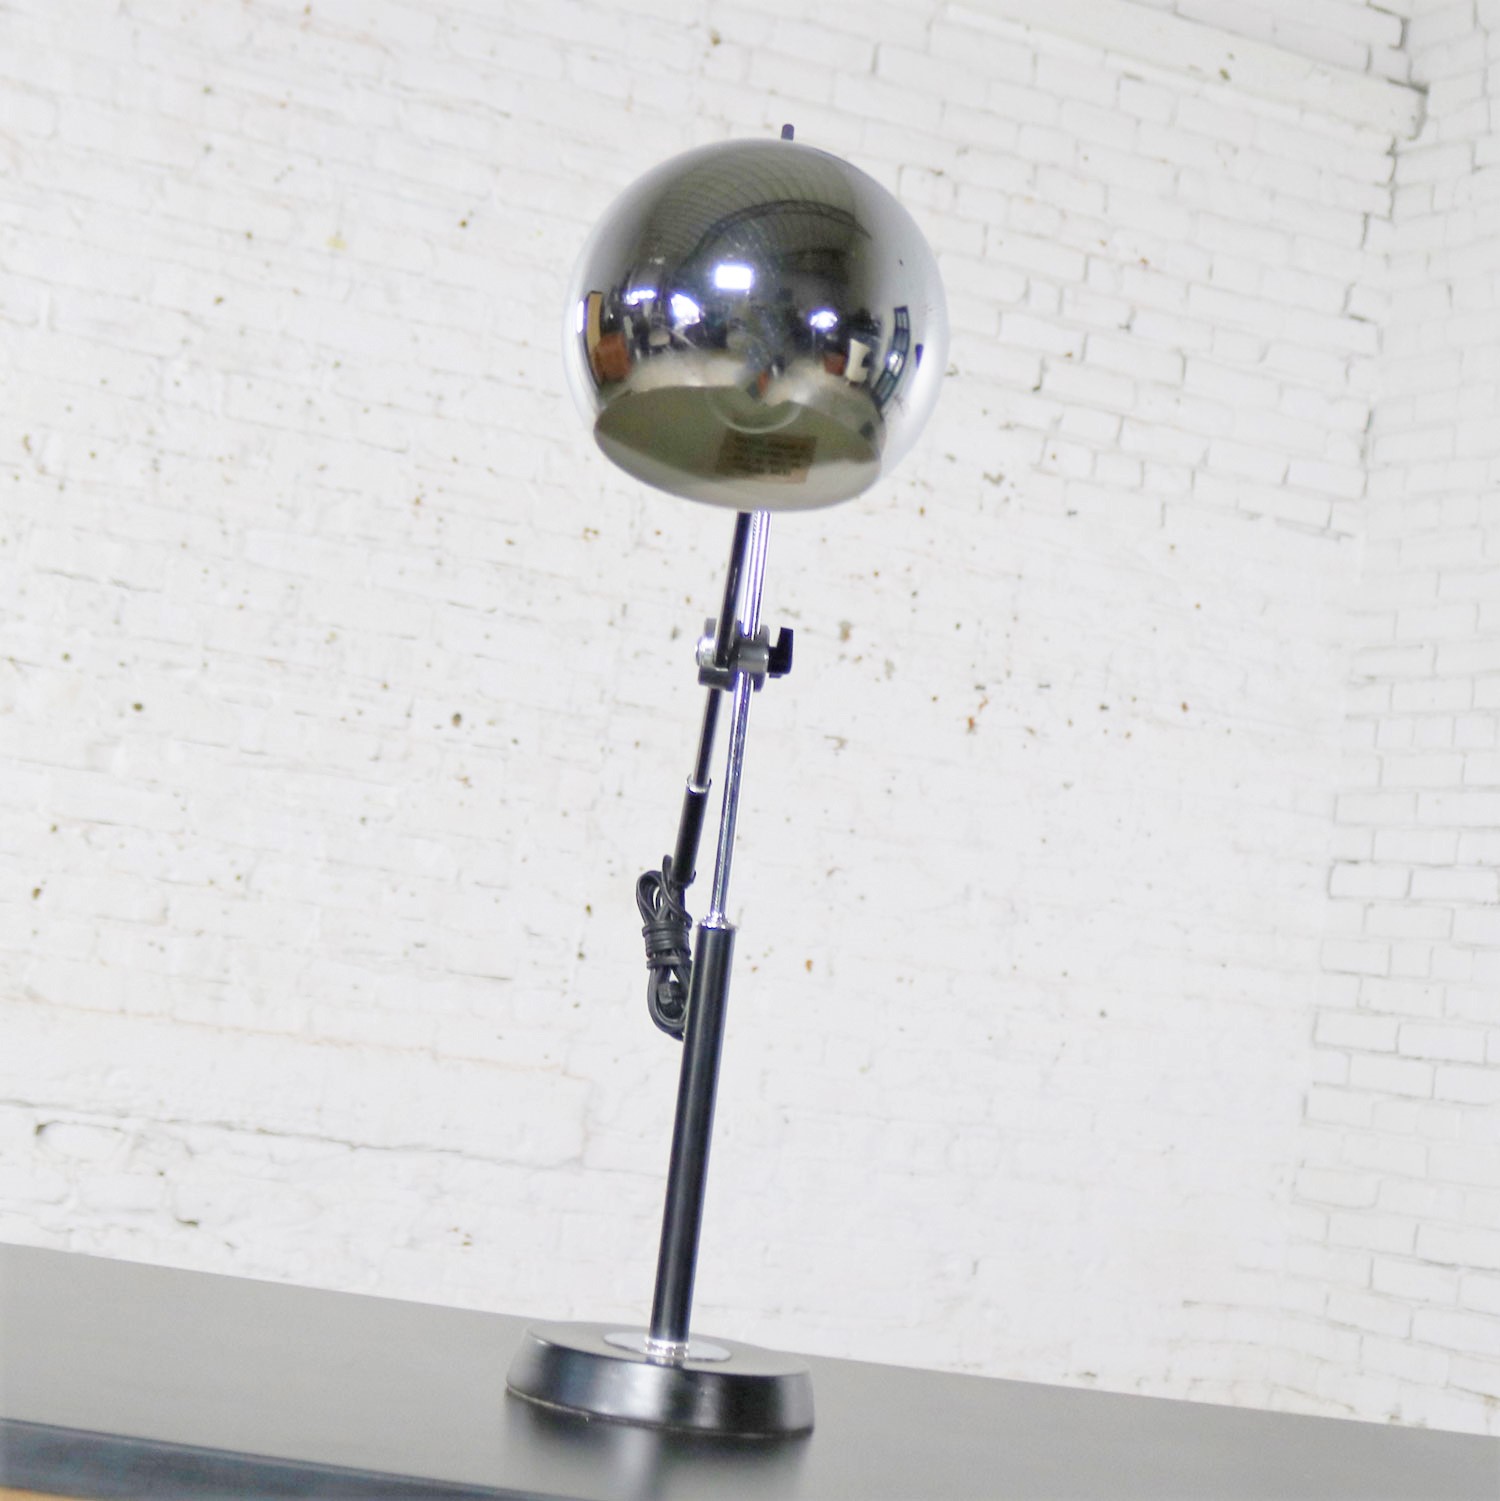 Articulating Chrome and Black Ball Orb Task Lamp Attributed to Robert Sonneman